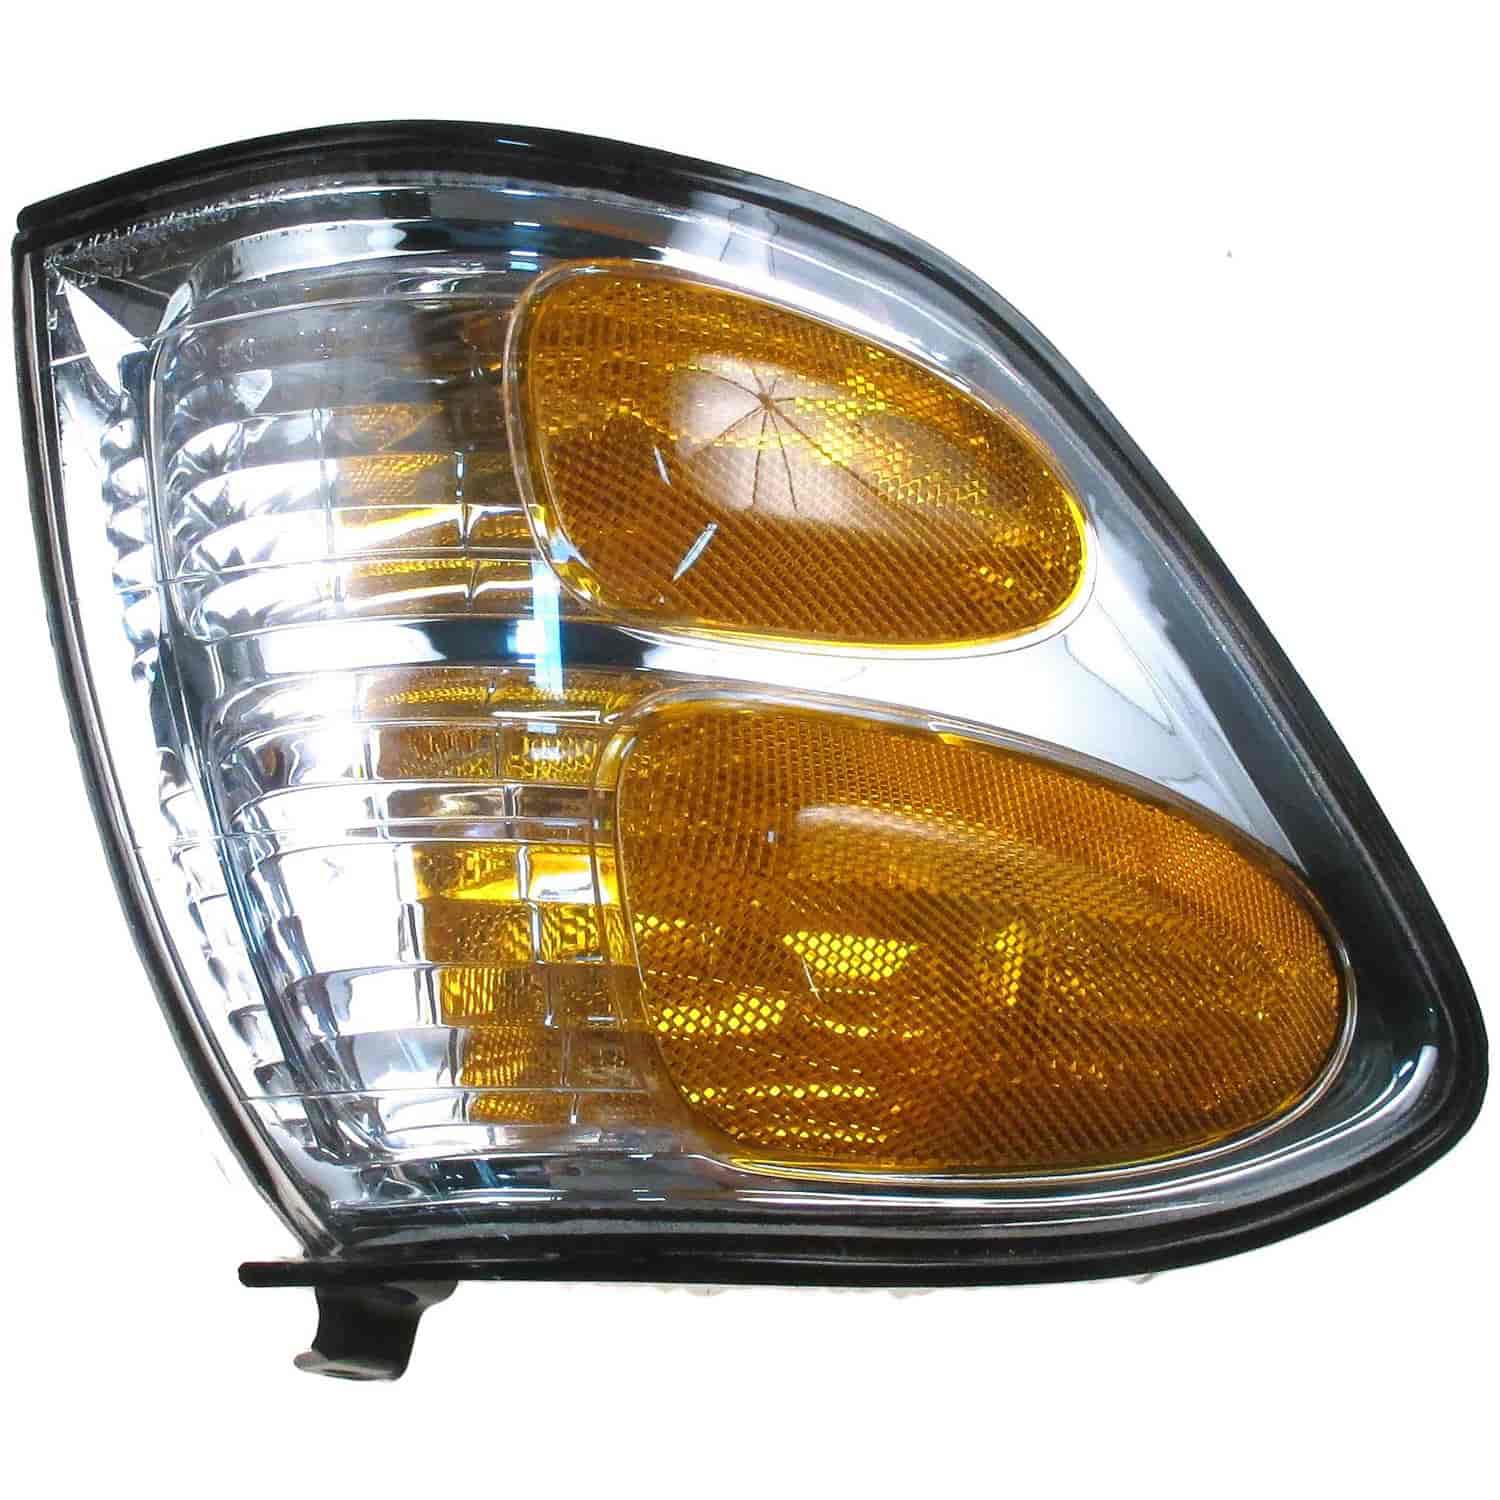 Turn Signal Lamp Assembly